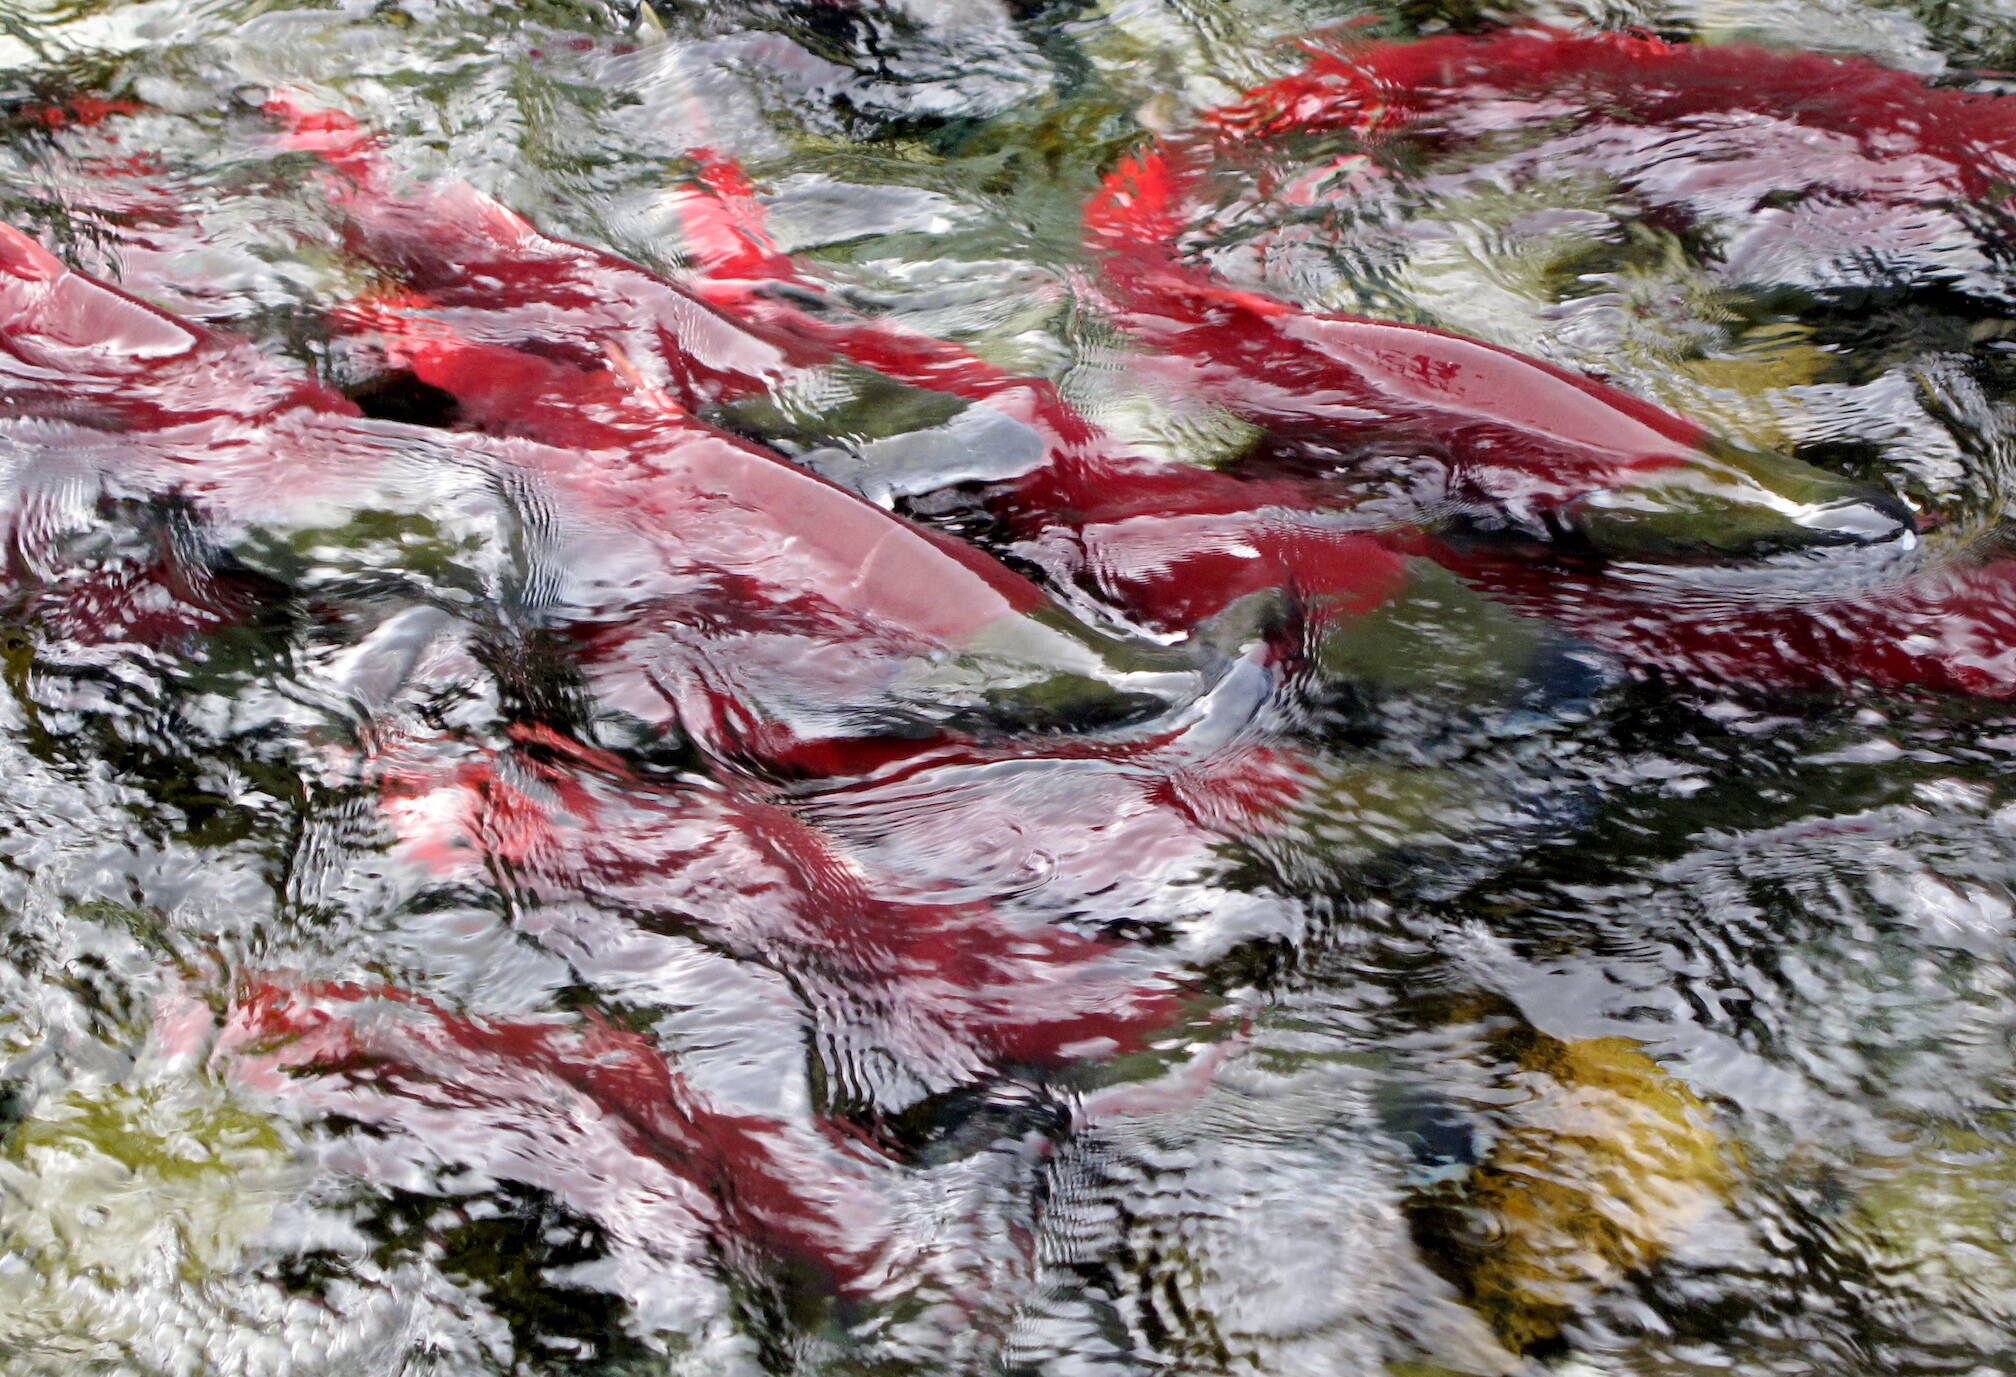 Red salmon gather at a Gulkana Hatchery fish weir that prevents them from going upstream on the east fork of the Gulkana River.(Courtesy Photo/ Ned Rozell)